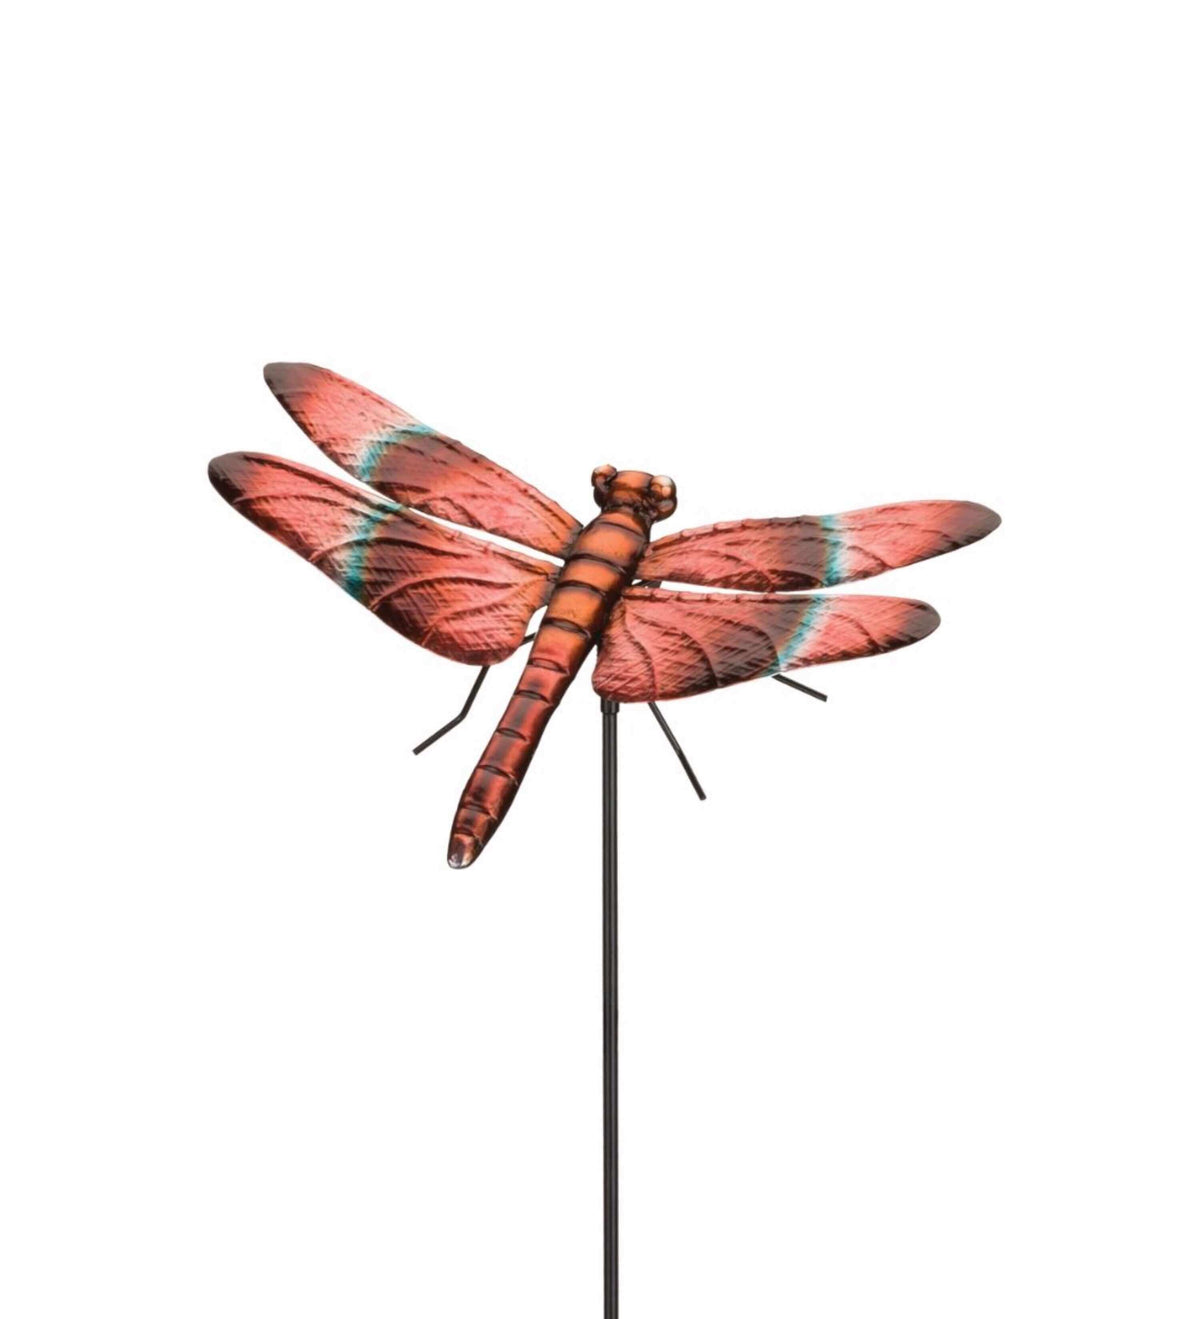 Meadowhawk Dragonfly Wall Decor or Stake